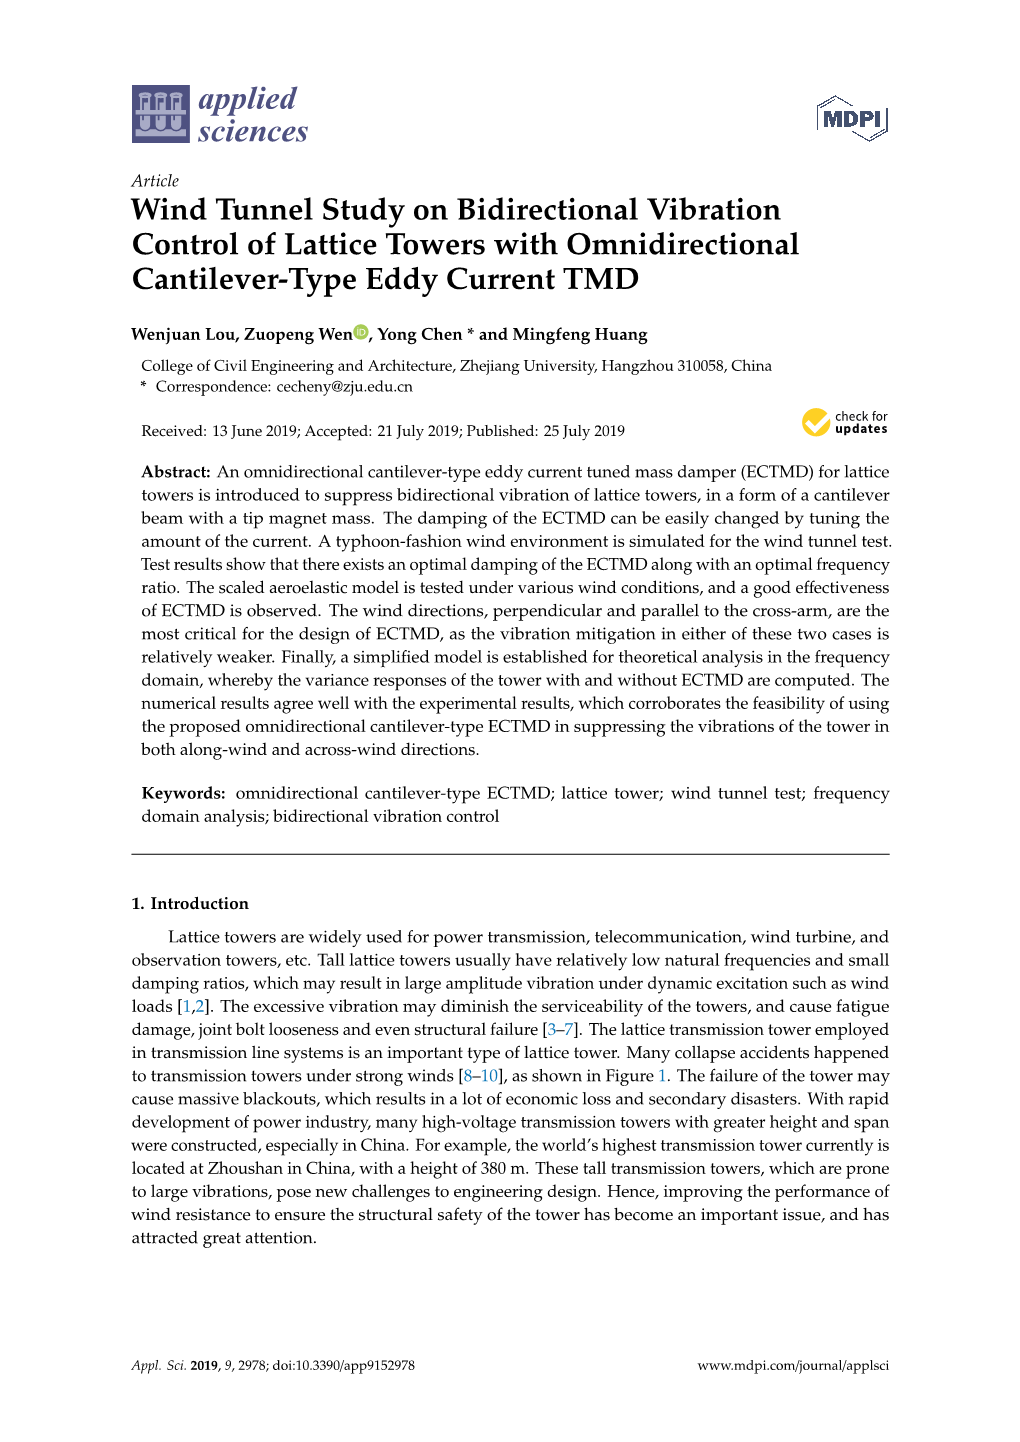 Wind Tunnel Study on Bidirectional Vibration Control of Lattice Towers with Omnidirectional Cantilever-Type Eddy Current TMD